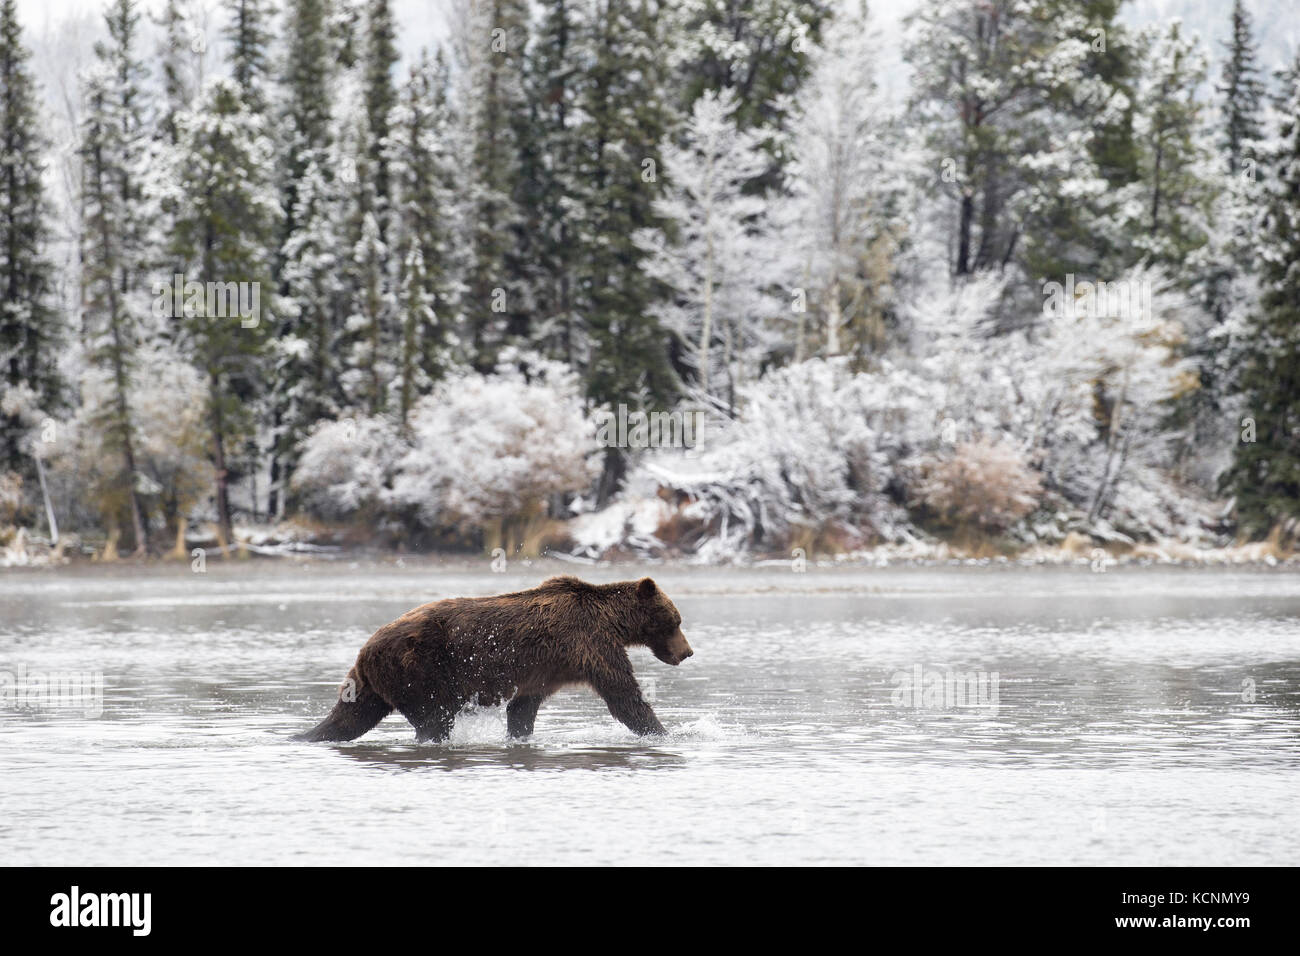 Grizzly bear (Ursus arctos horribilis), male in early snowfall, Chilcotin Region, British Columbia, Canada. Stock Photo